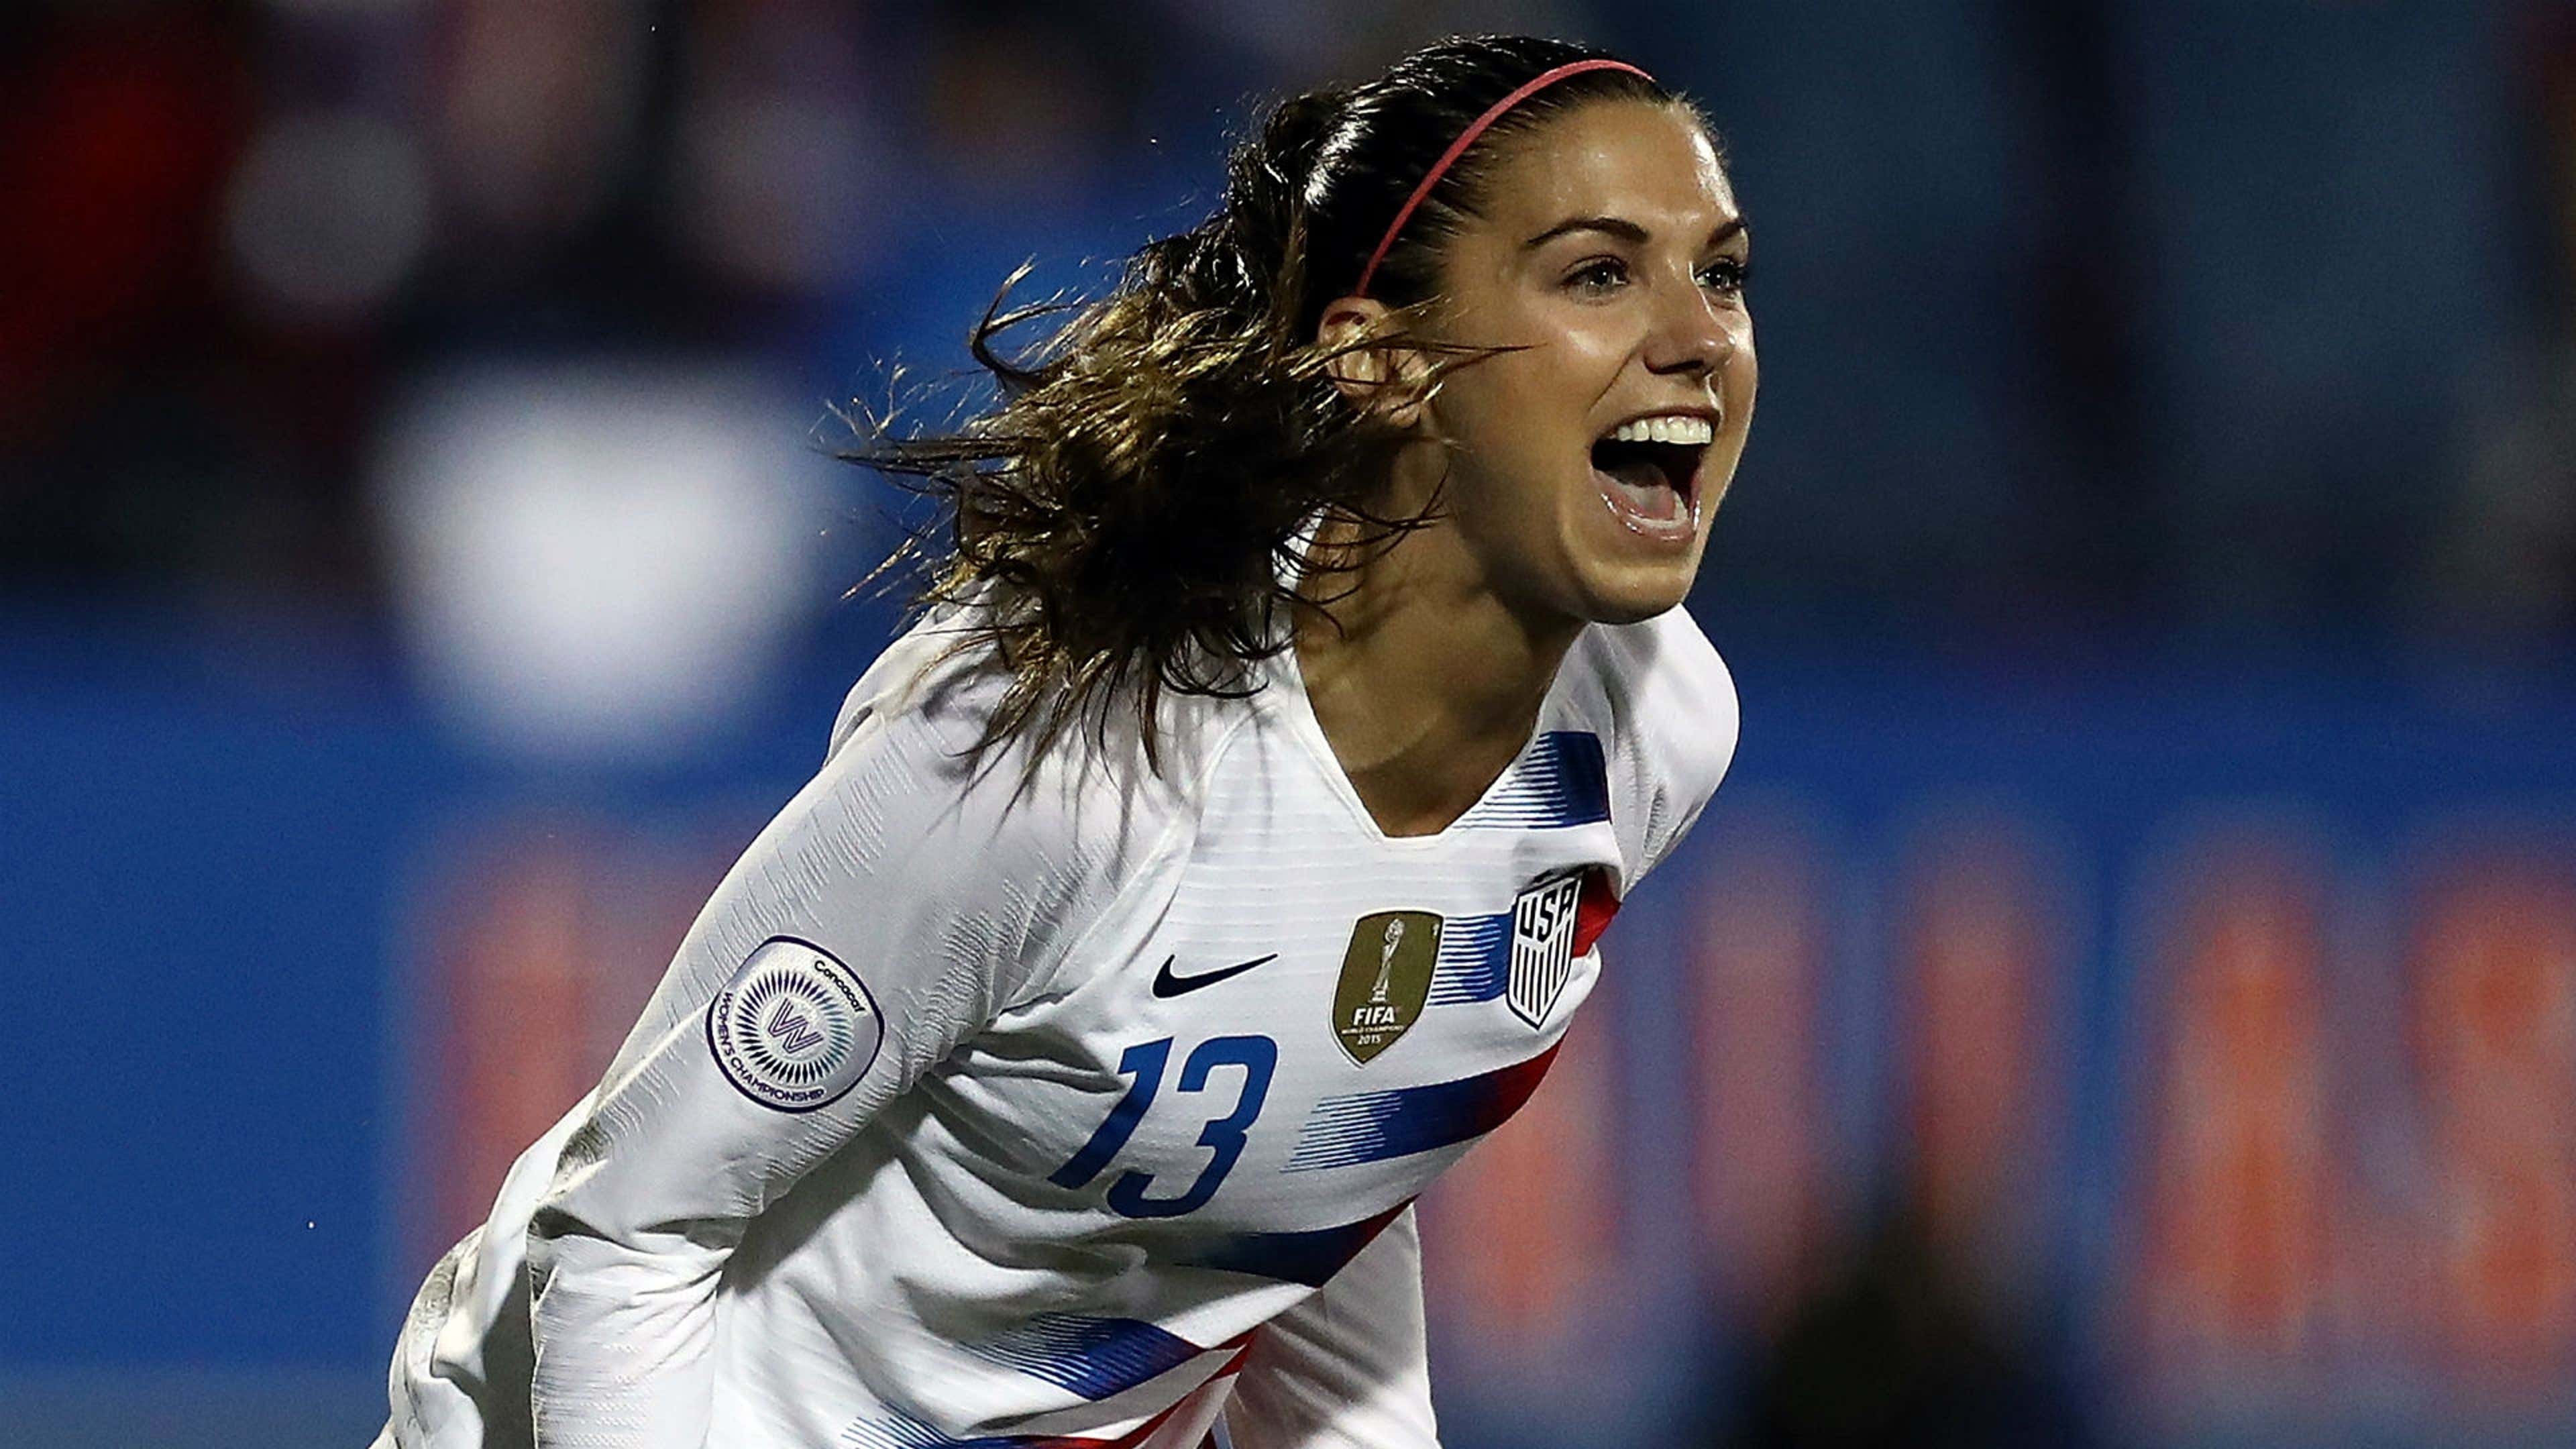 'It's so far behind' – USWNT star Morgan slams Women's World Cup prize ...